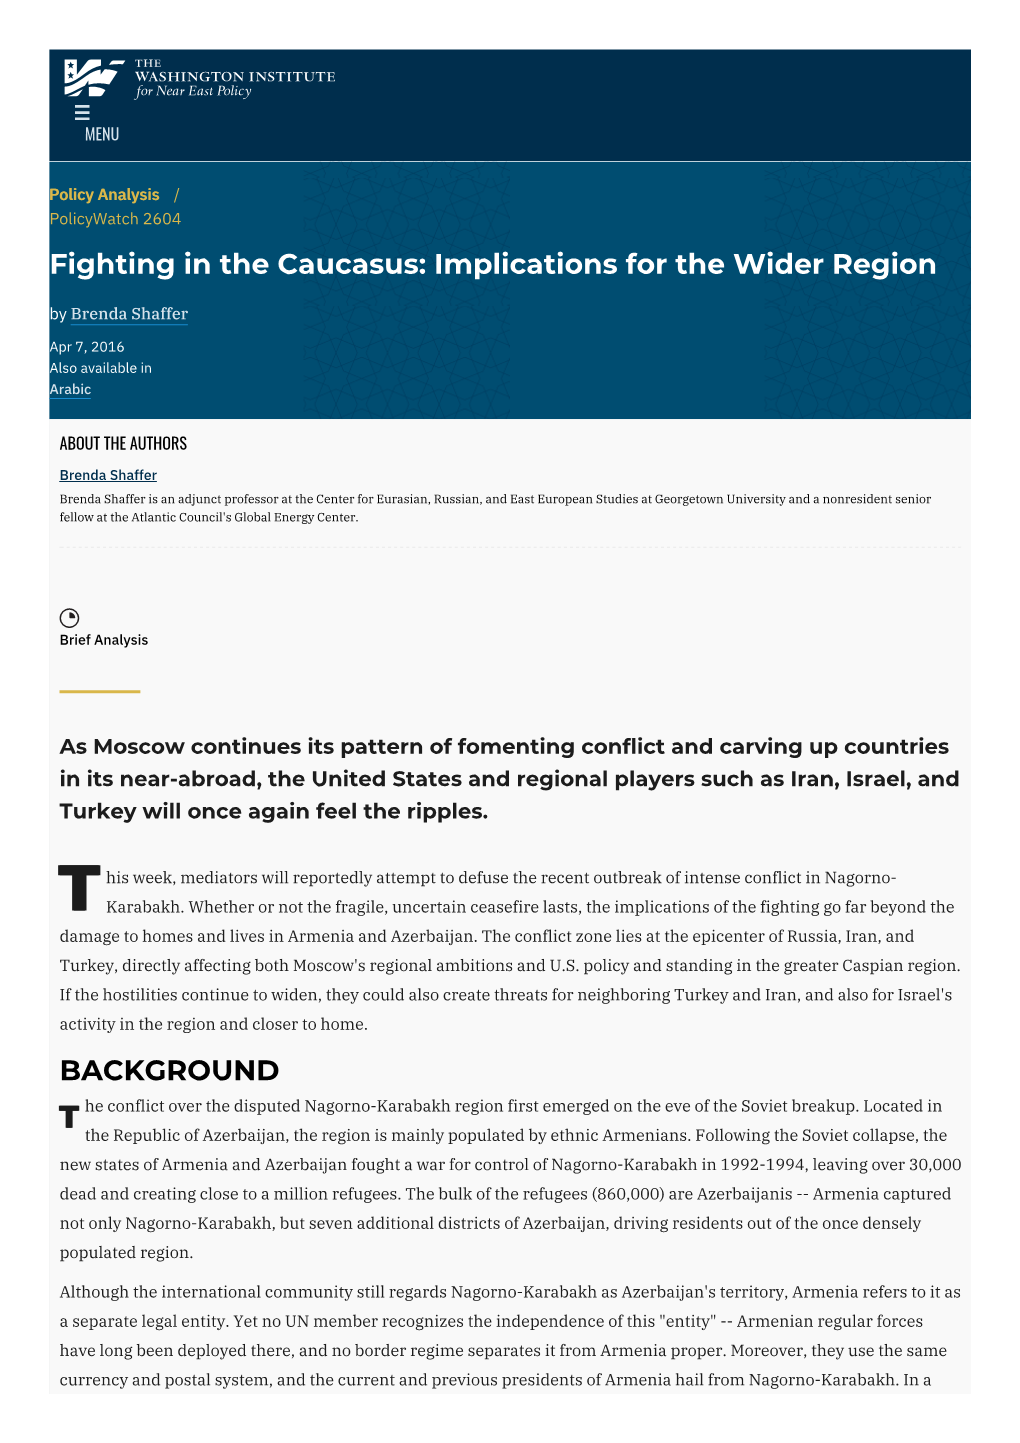 Fighting in the Caucasus: Implications for the Wider Region by Brenda Shaffer